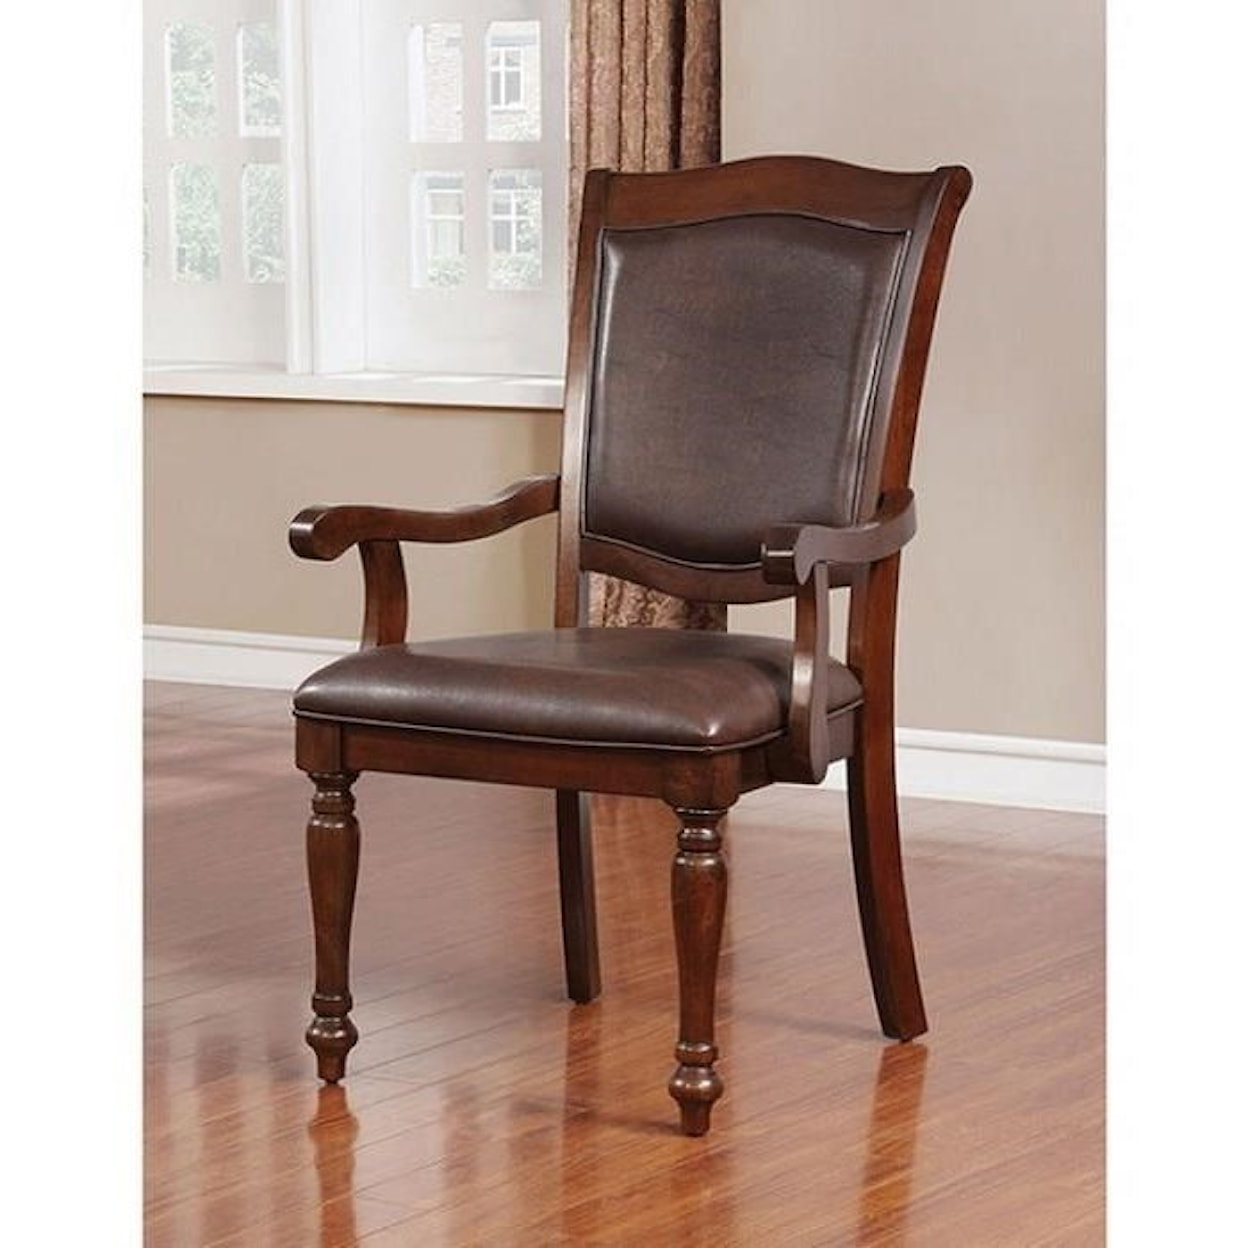 Furniture of America Sylvana Set of 2 Arm Chairs